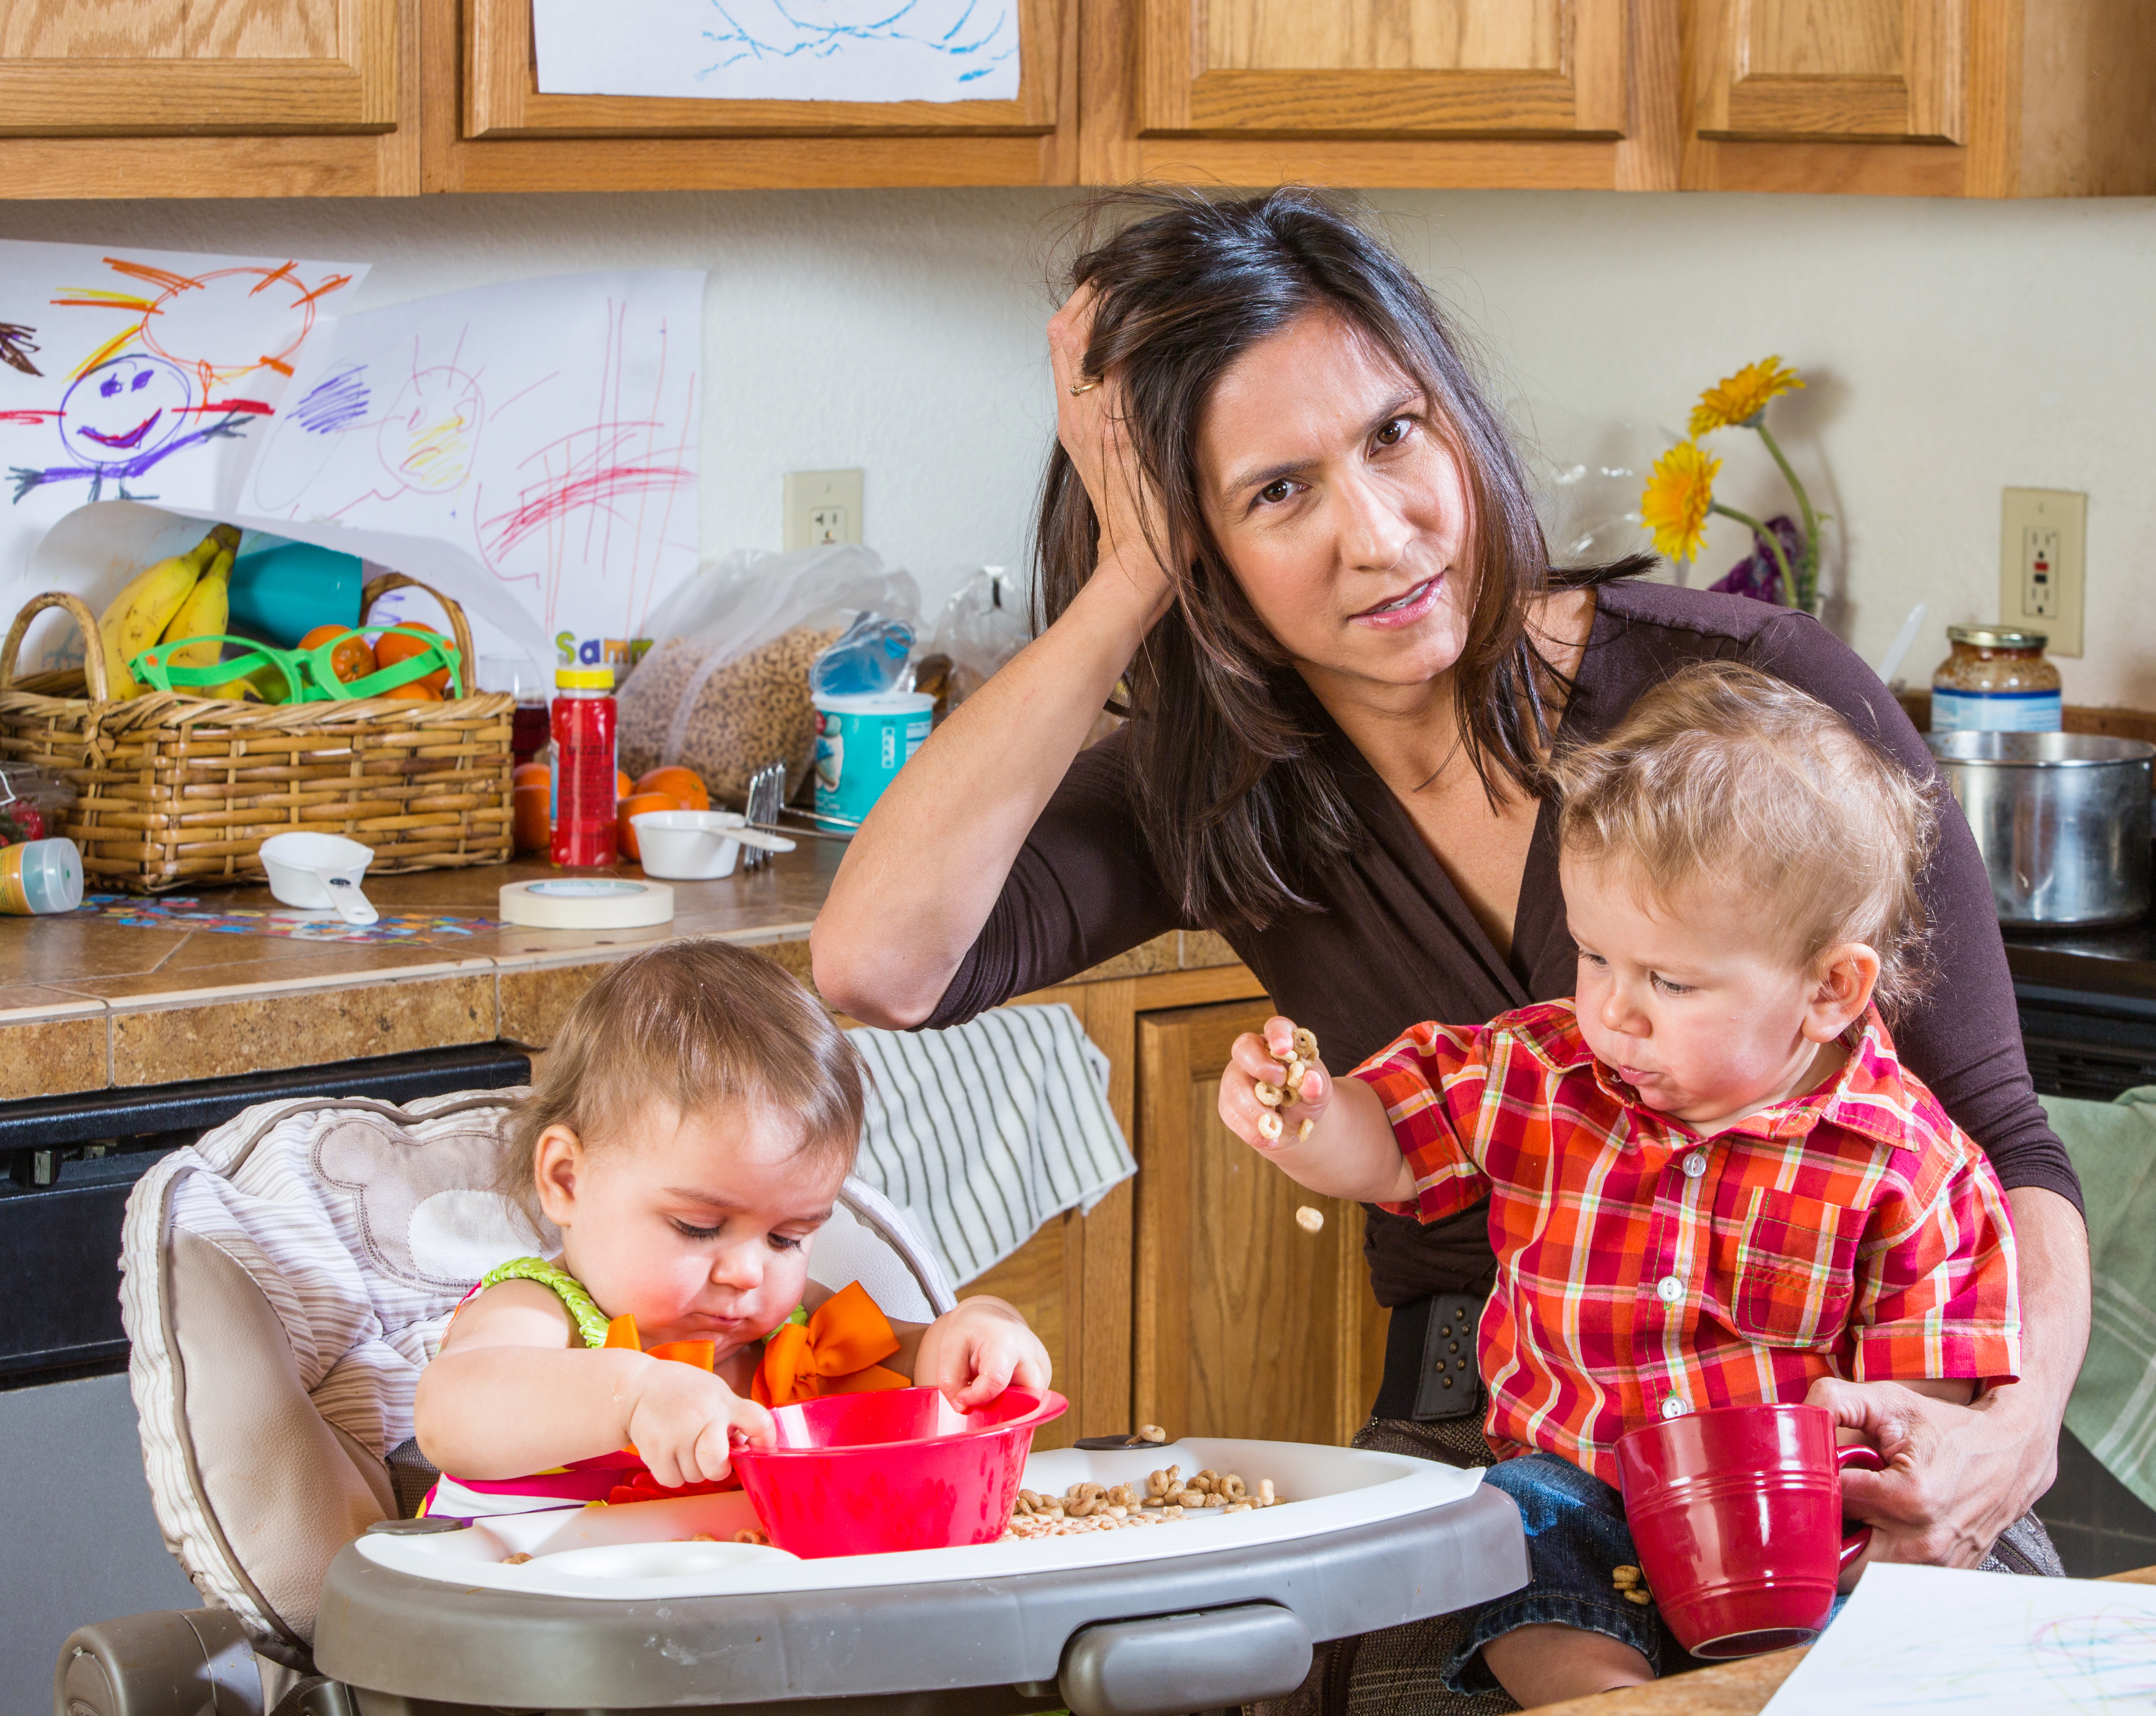 A stressed-out mother in the kitchen with her babies | Source: Shutterstock